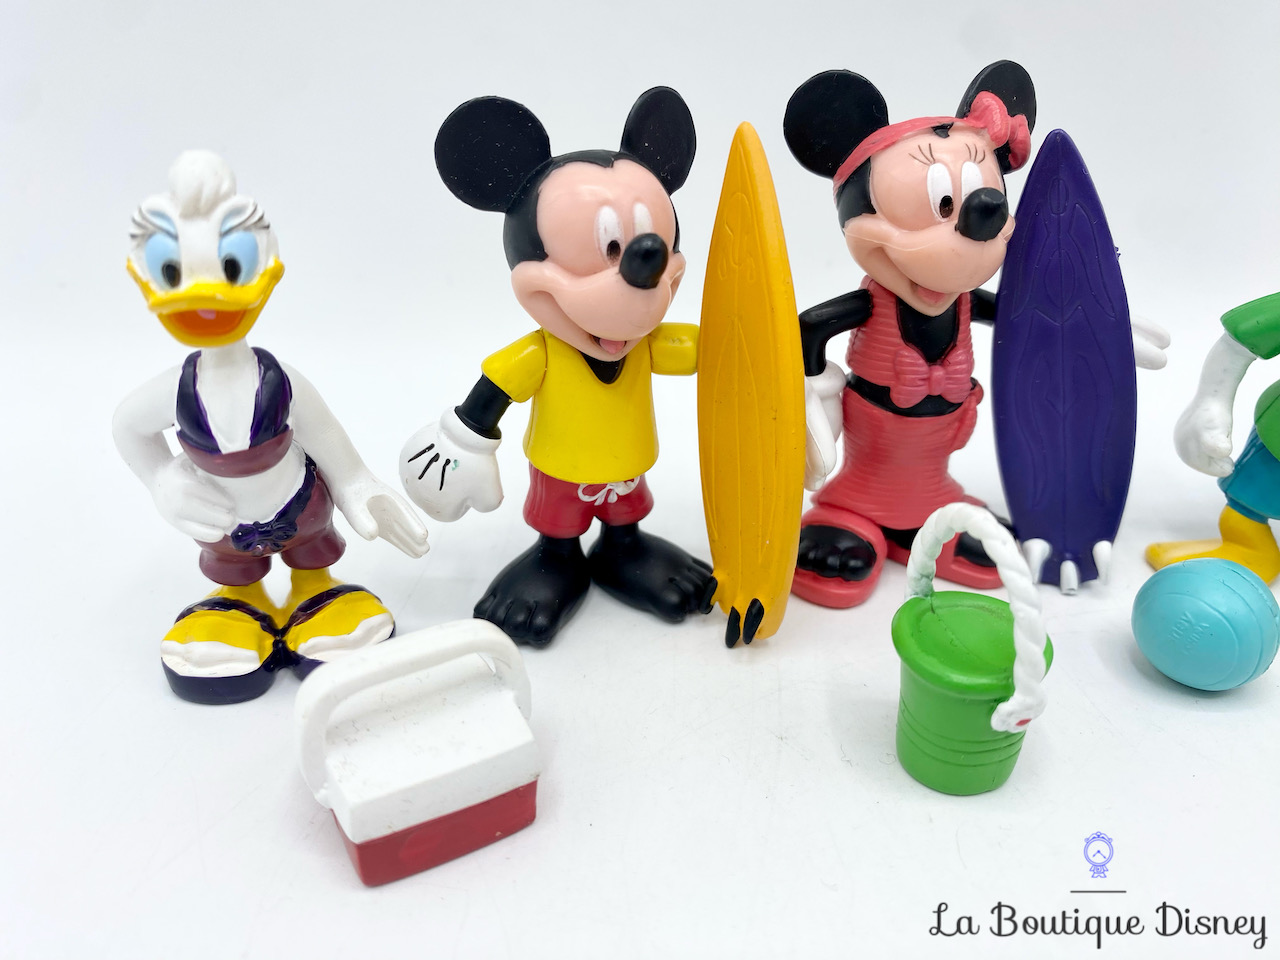 figurines-mickey-mouse-plage-collectibles-figures-playset-disney-store-coffret-de-figurines-1